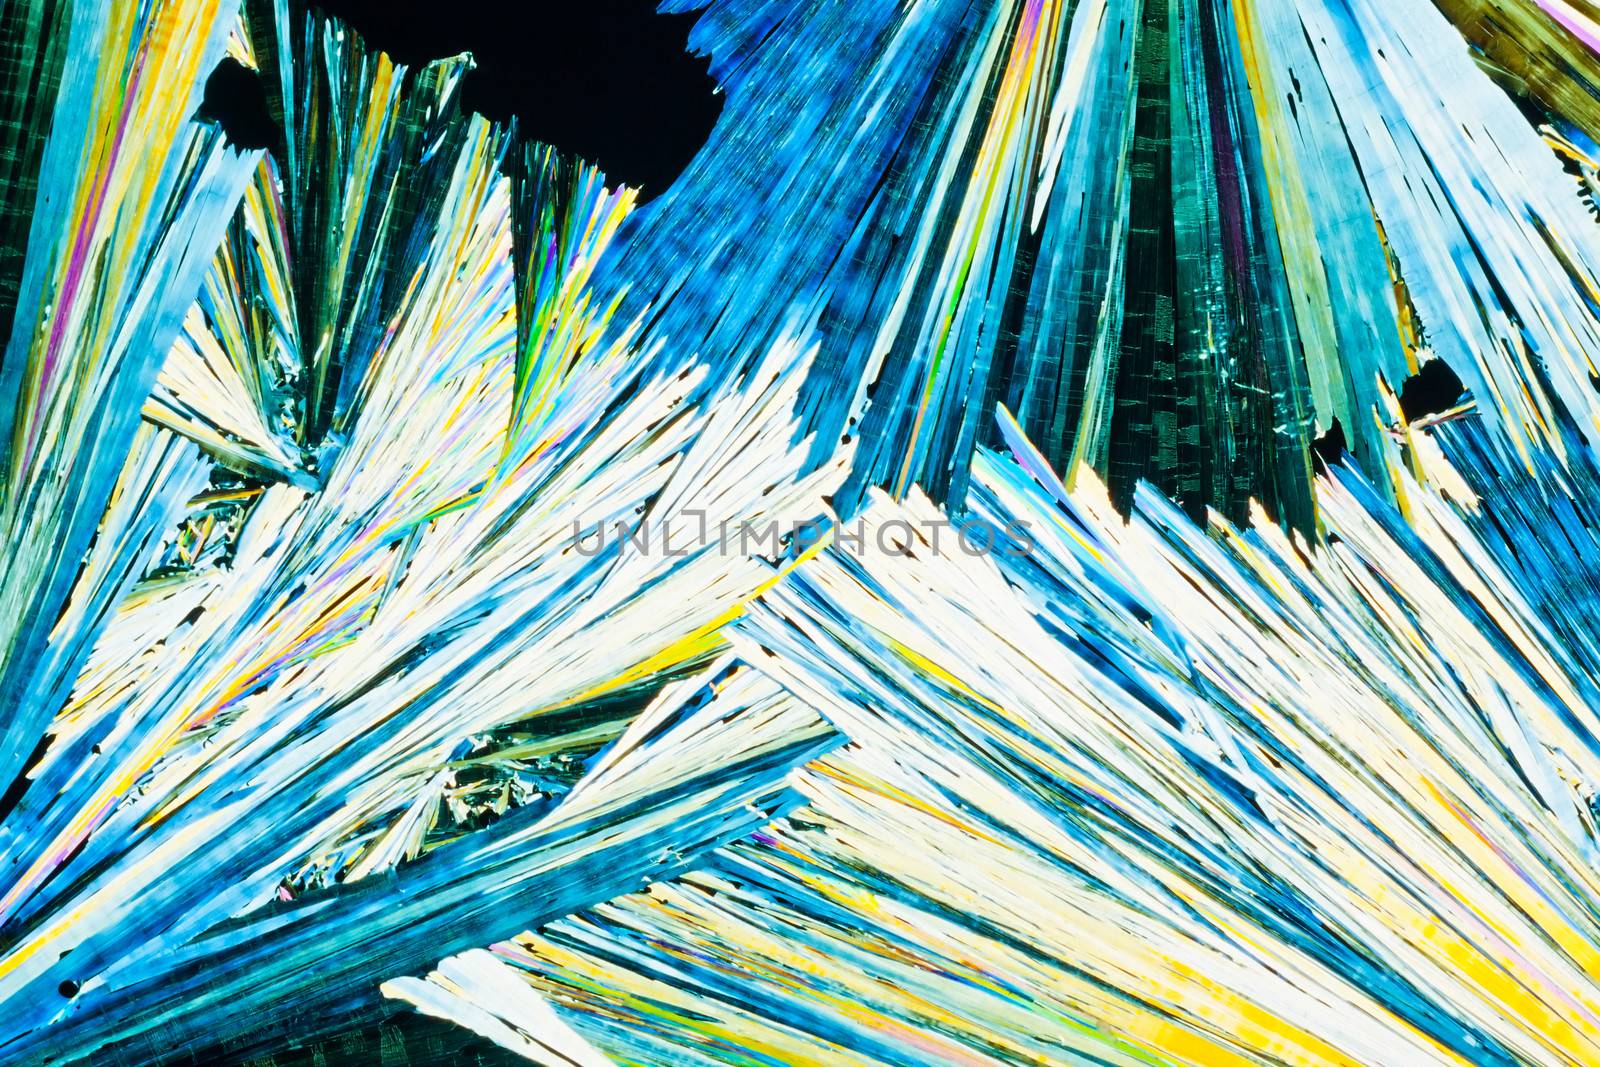 Colorful appearance of crystals of urea or carbamid, a powerful nitrogen fertilizer for agricultural use, in polarized light.